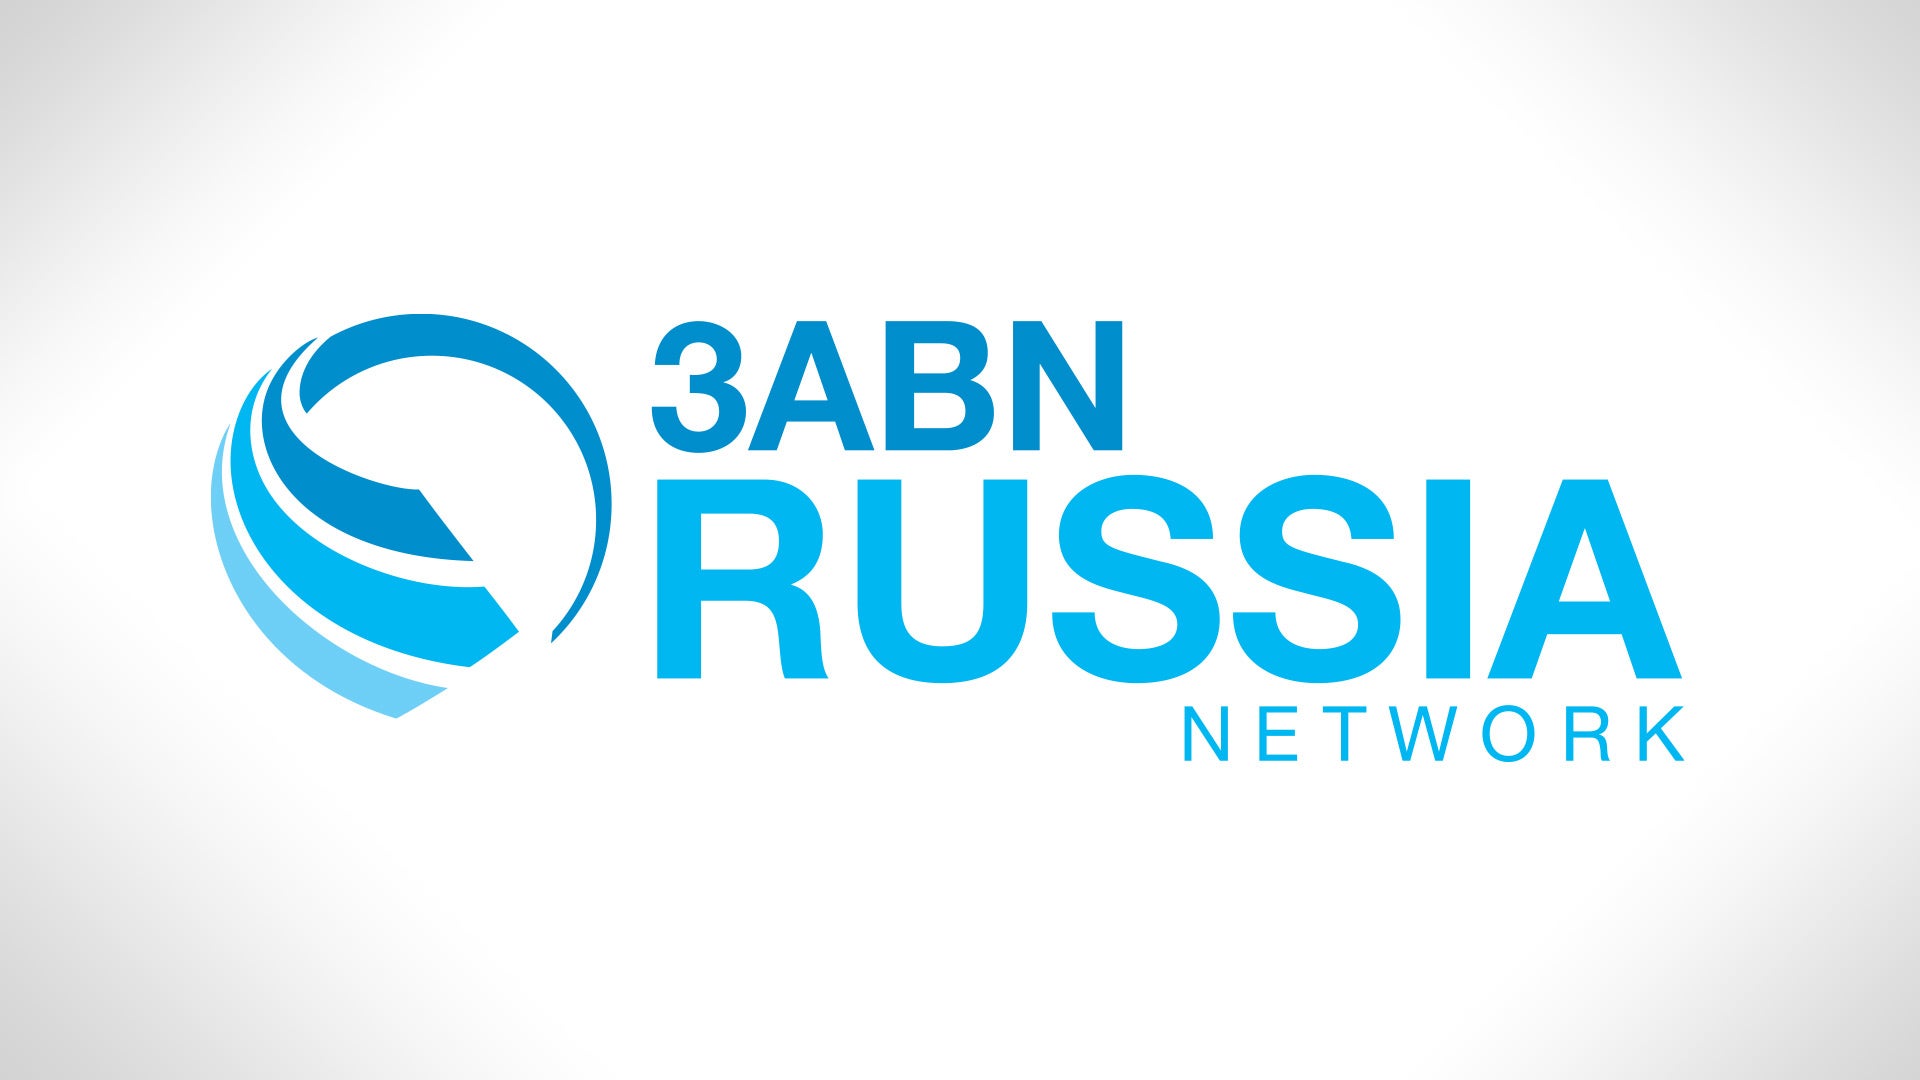 3ABN Russia Network